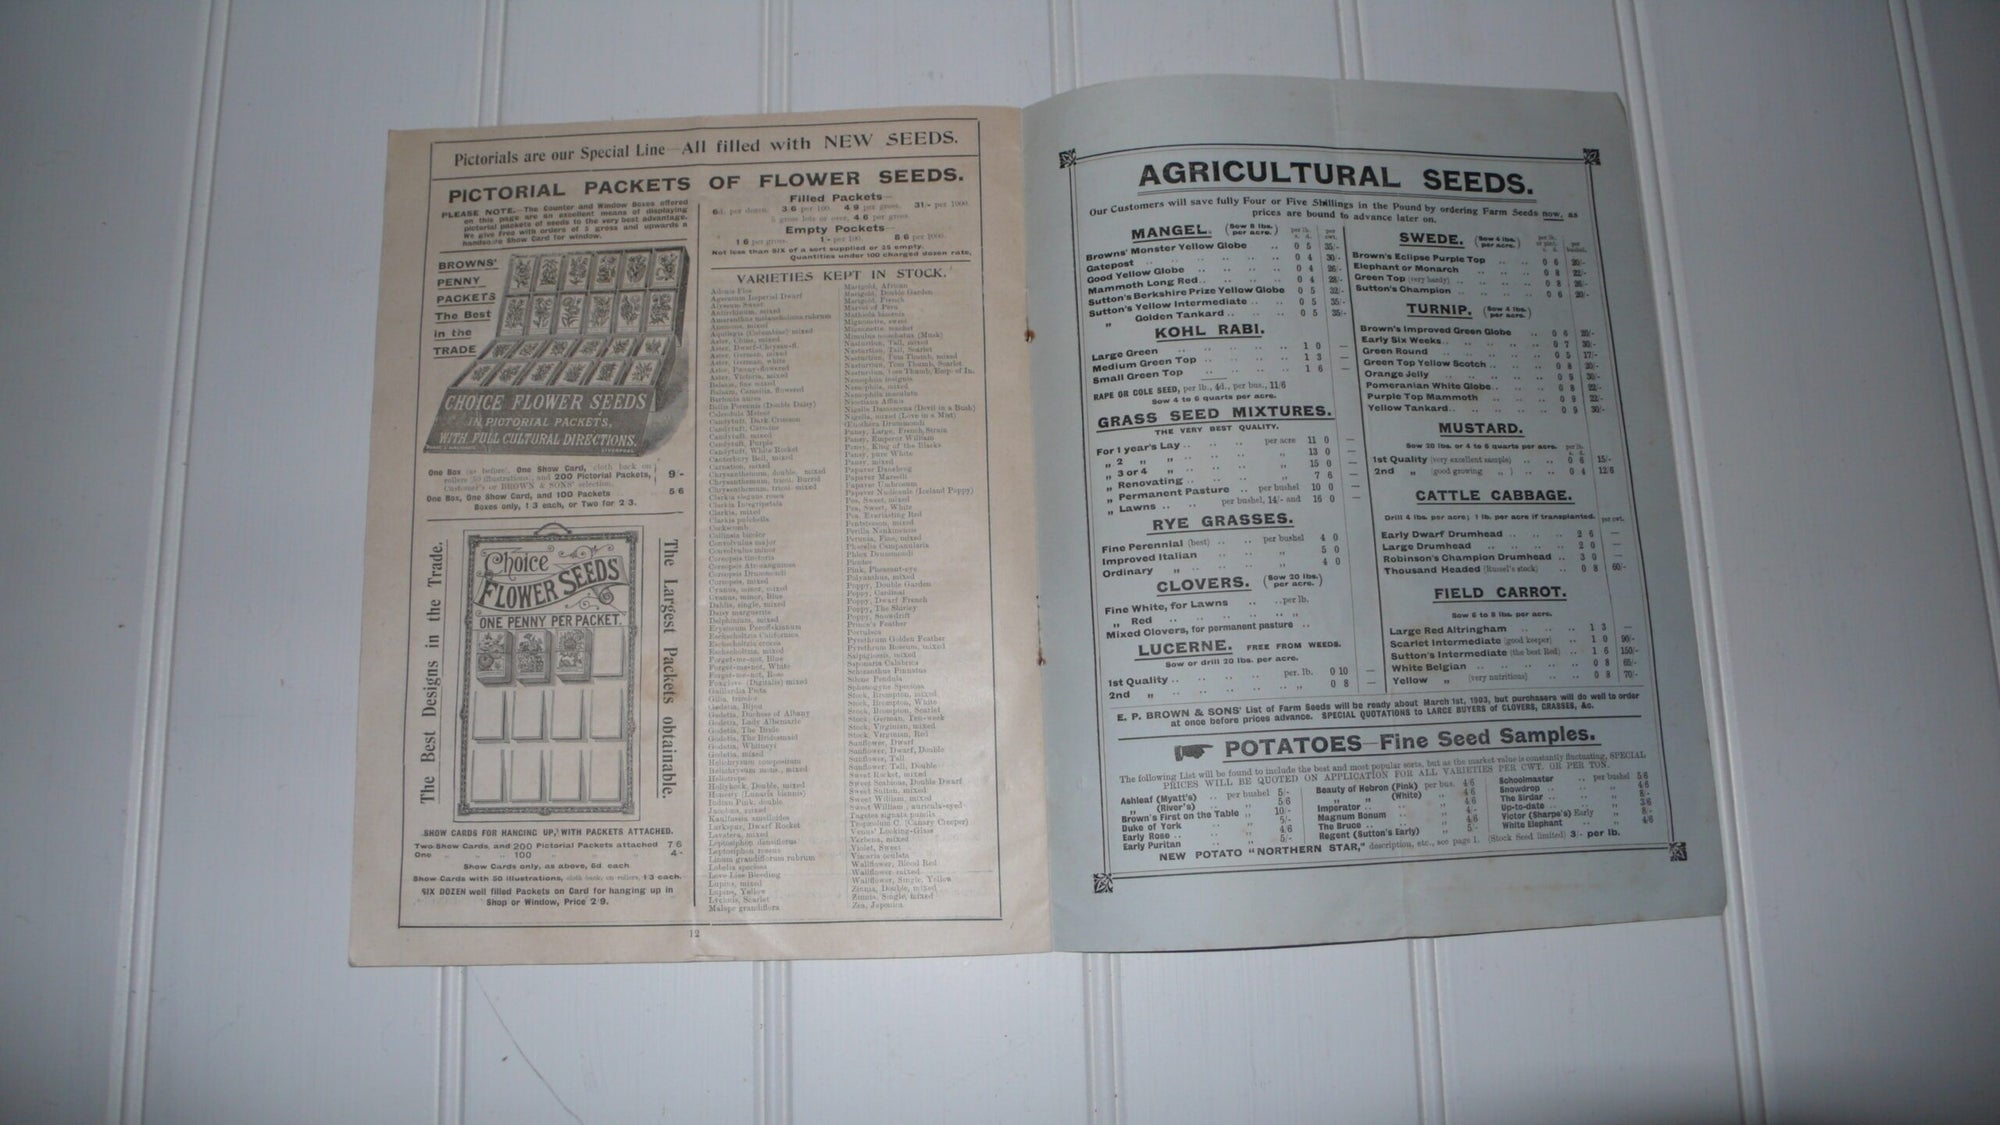 Brown&#39;s Seed Catalogue